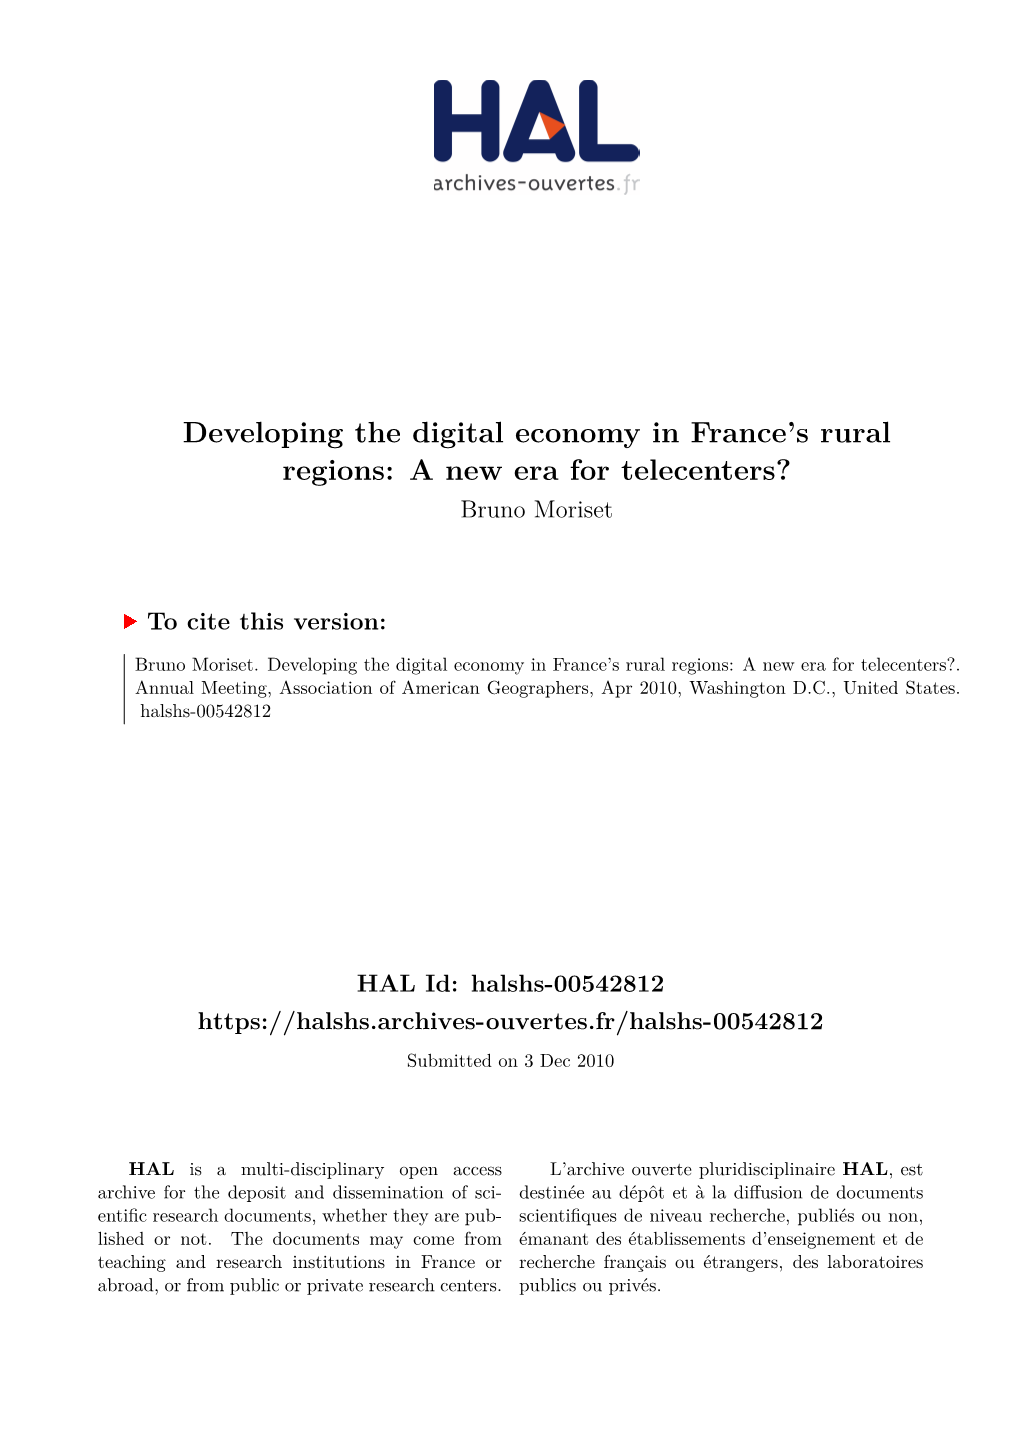 Developing the Digital Economy in France's Rural Regions: a New Era for Telecenters?